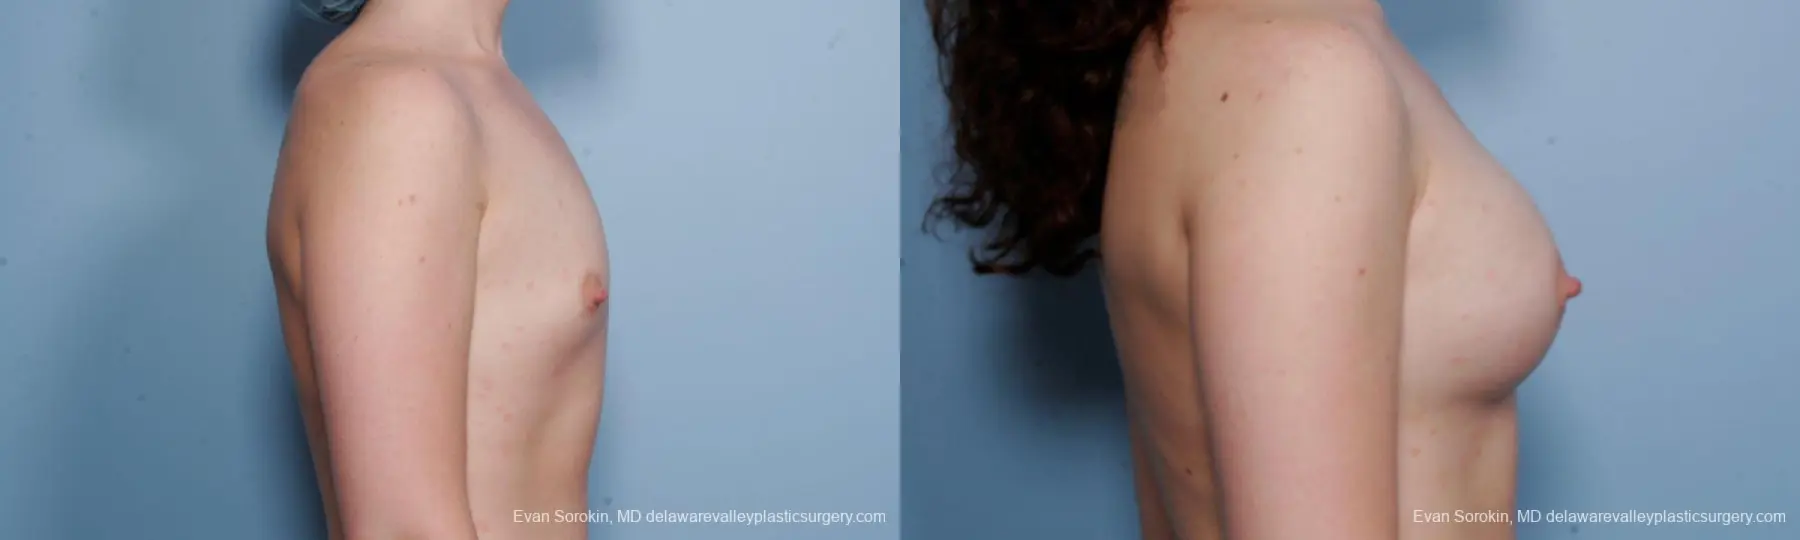 Philadelphia Breast Augmentation 9176 - Before and After 5